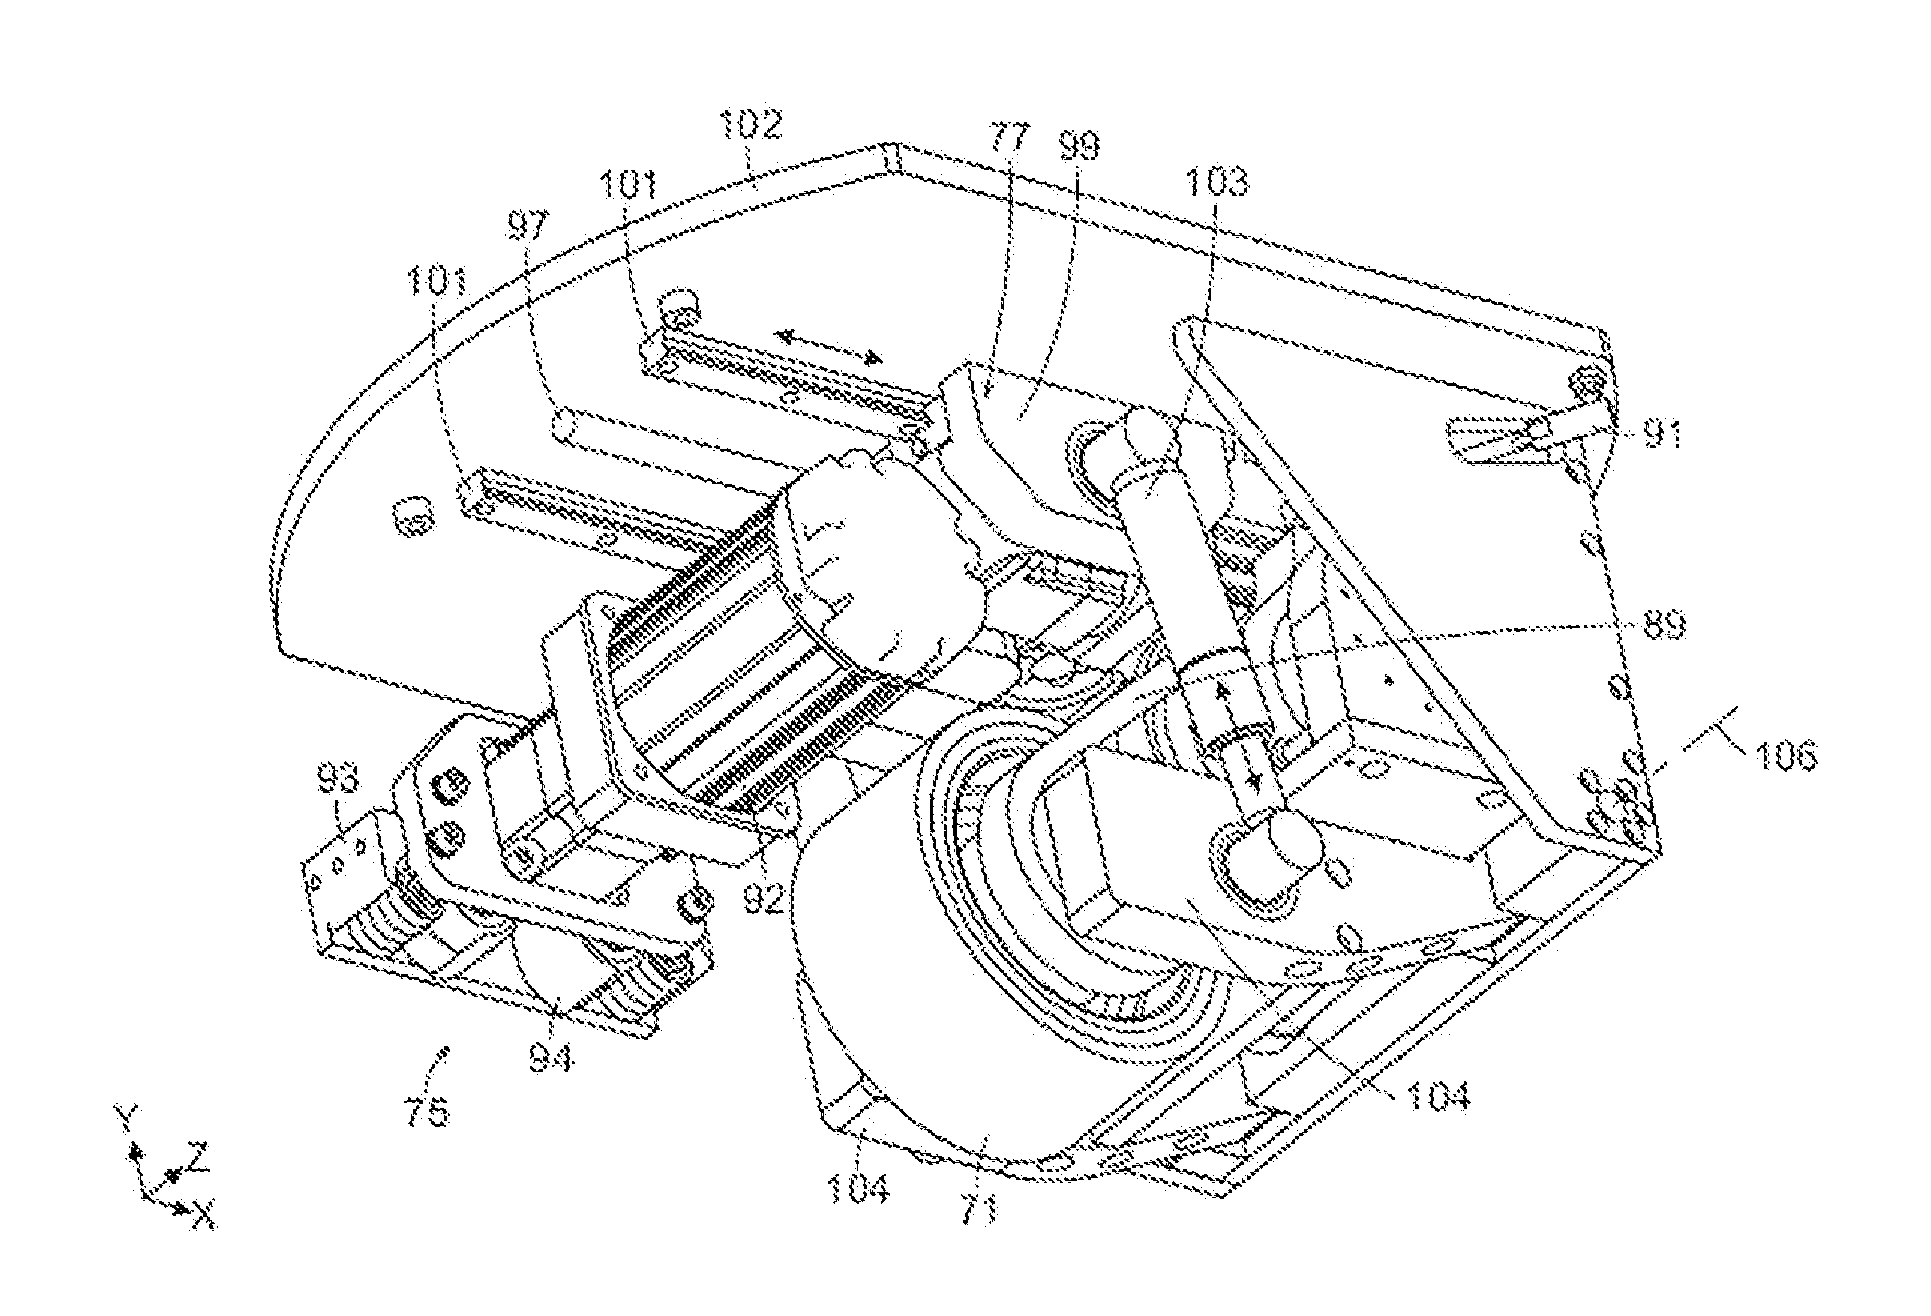 Caster system for mobile apparatus